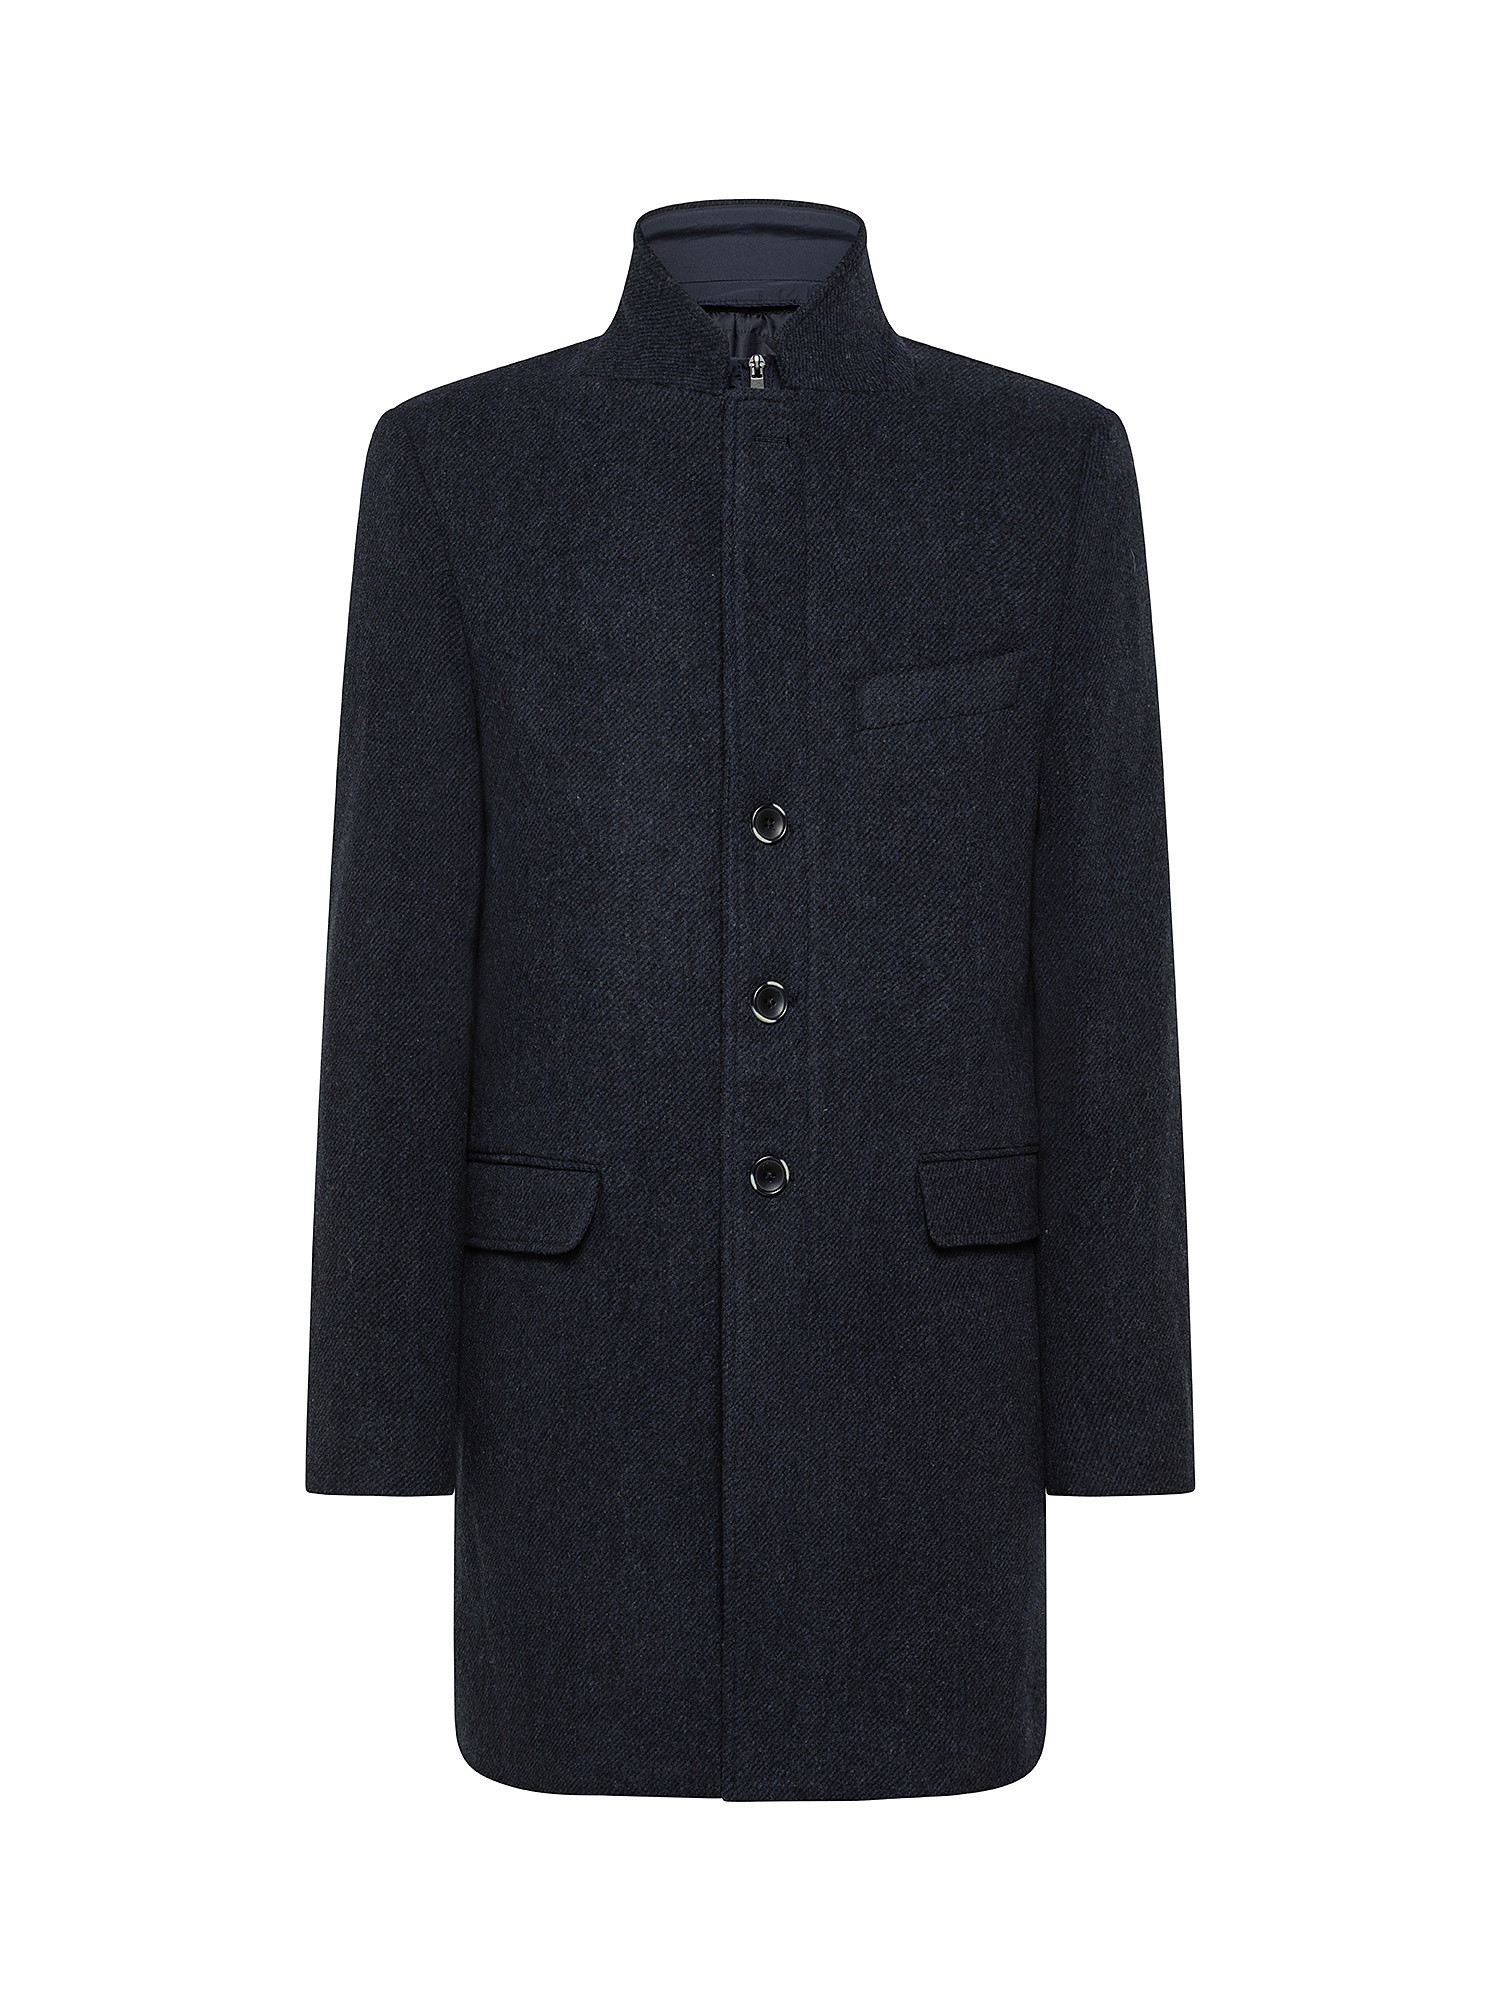 Wool coat with micro pattern and removable windproof bib, Blue, large image number 0